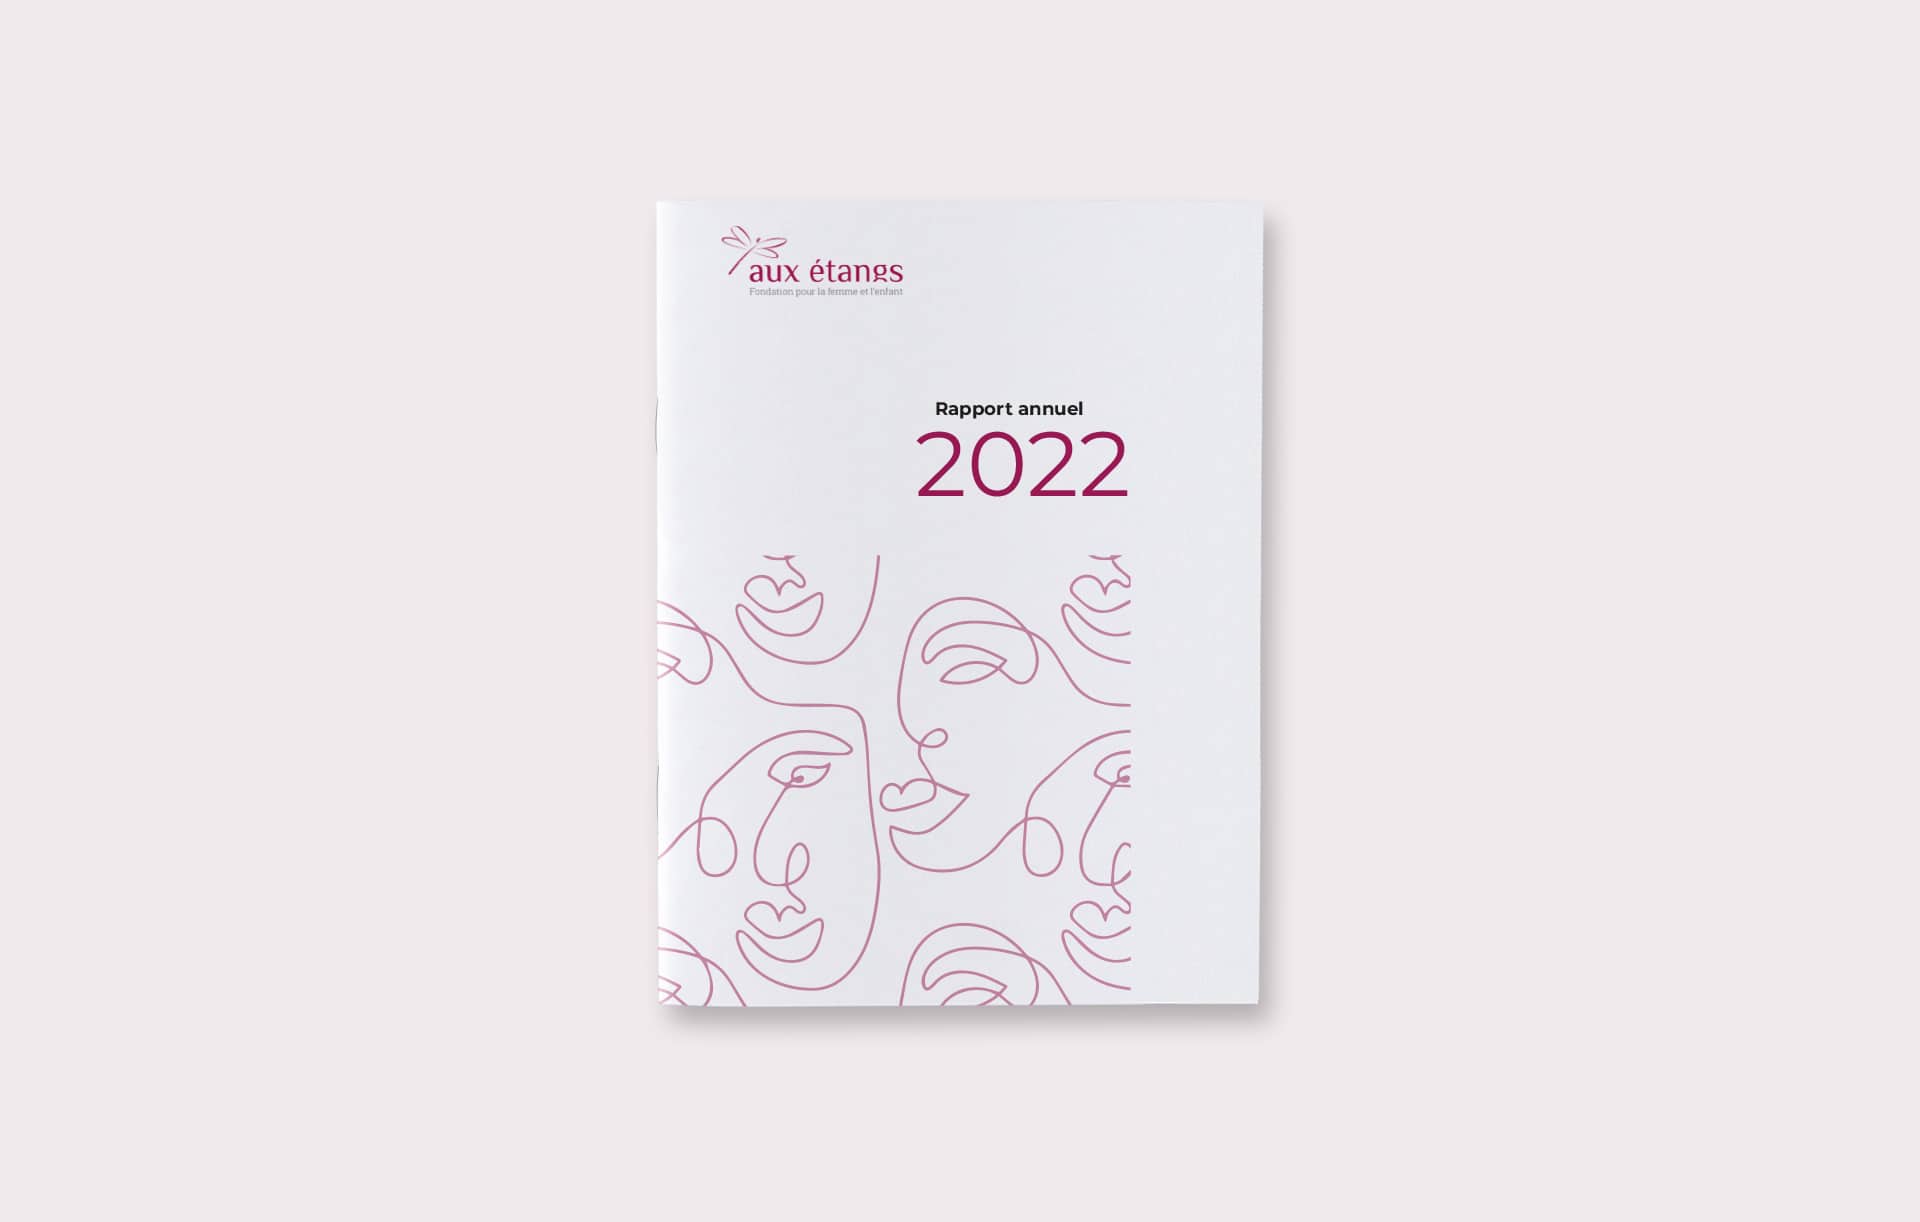 Rapport annuel 2022 image